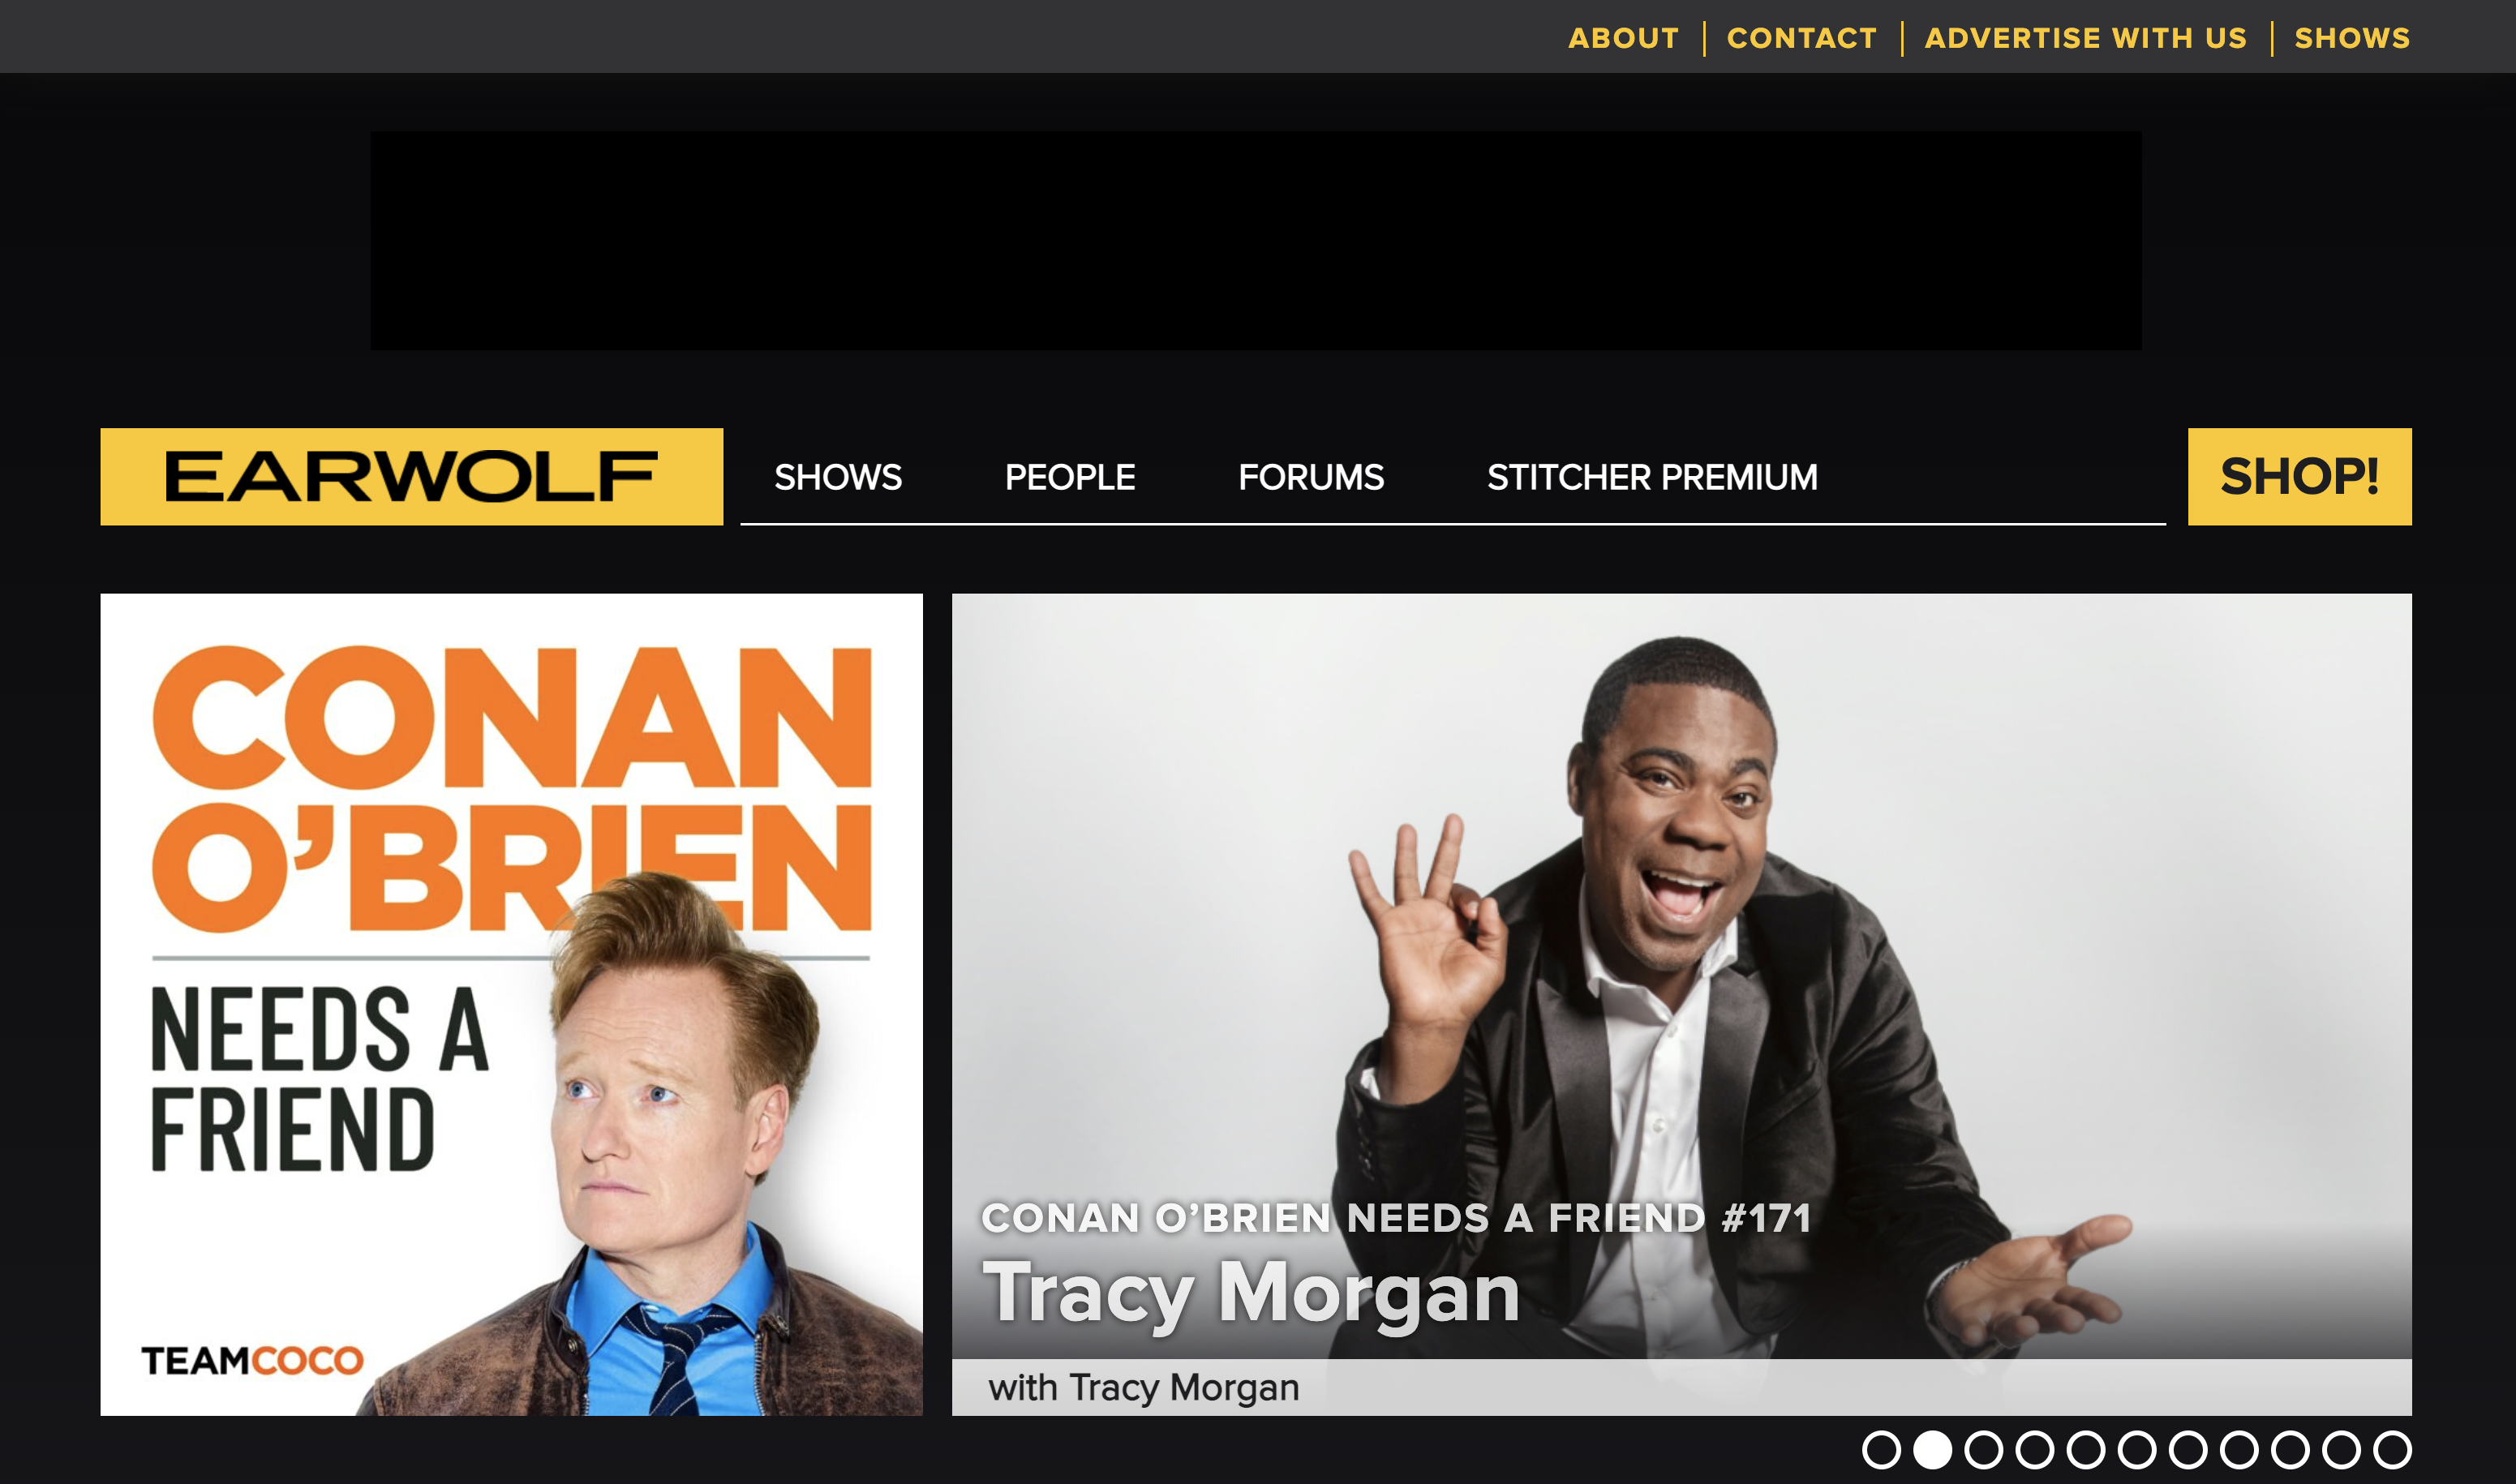 Earwolf homepage with Conan O'Brien and recent episode artwork of Tracey Morgan